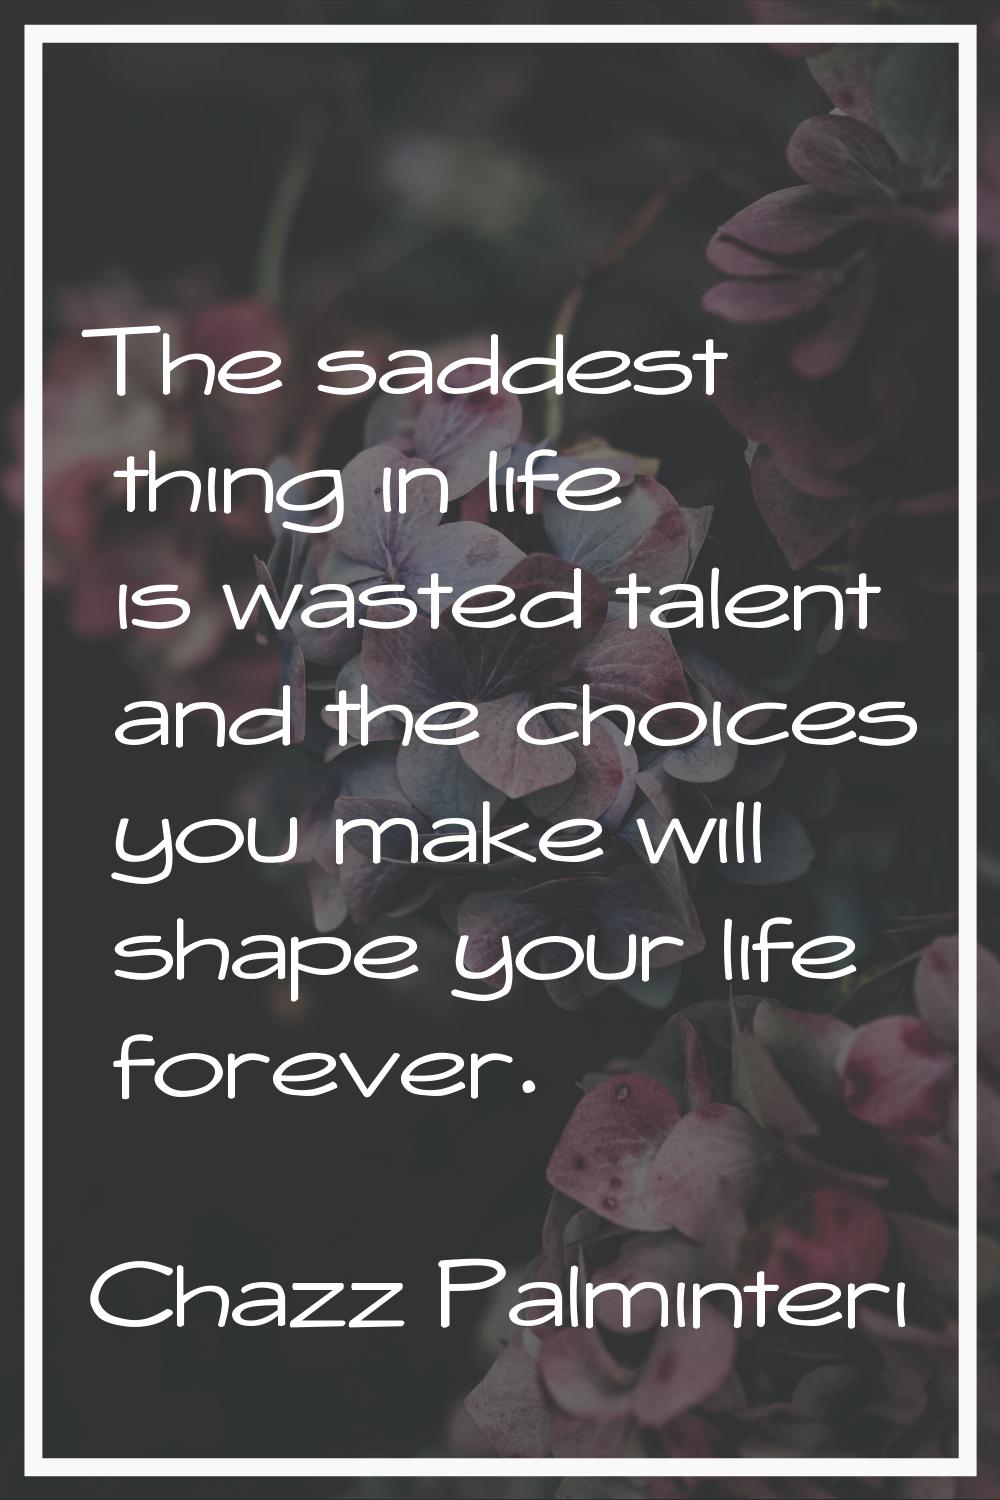 The saddest thing in life is wasted talent and the choices you make will shape your life forever.